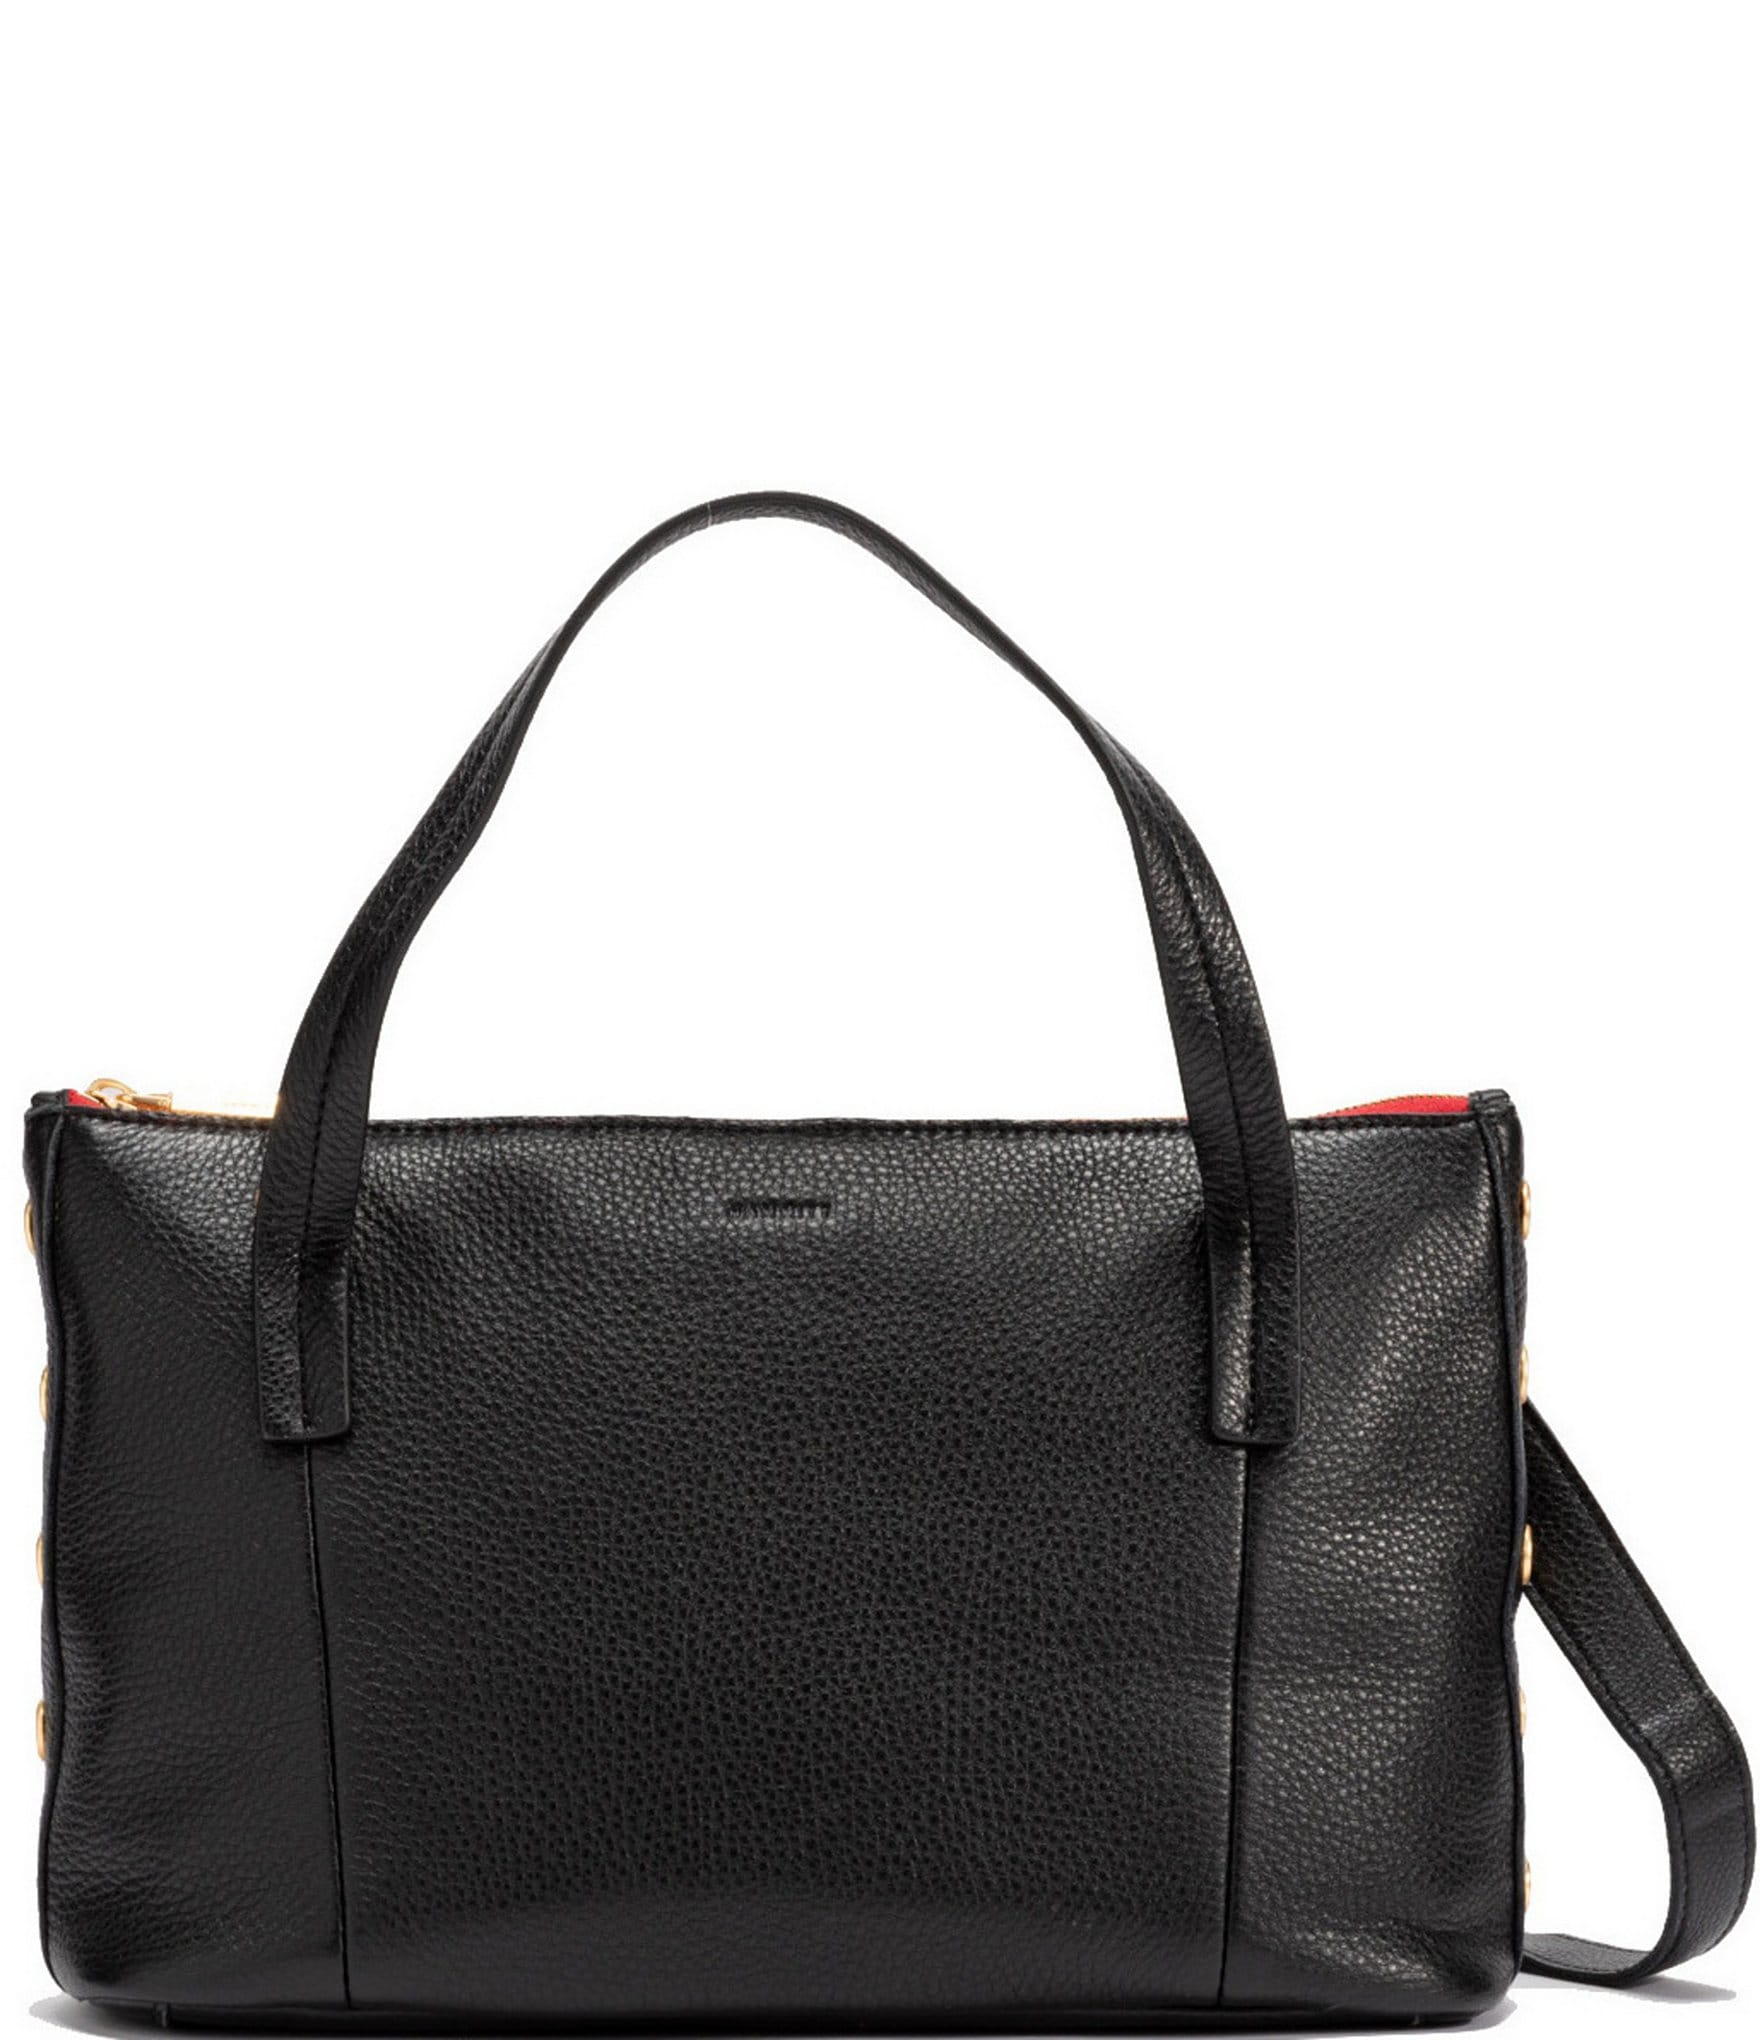  Fossil Women's Sydney Leather Tote Bag Purse Handbag, Black :  Clothing, Shoes & Jewelry